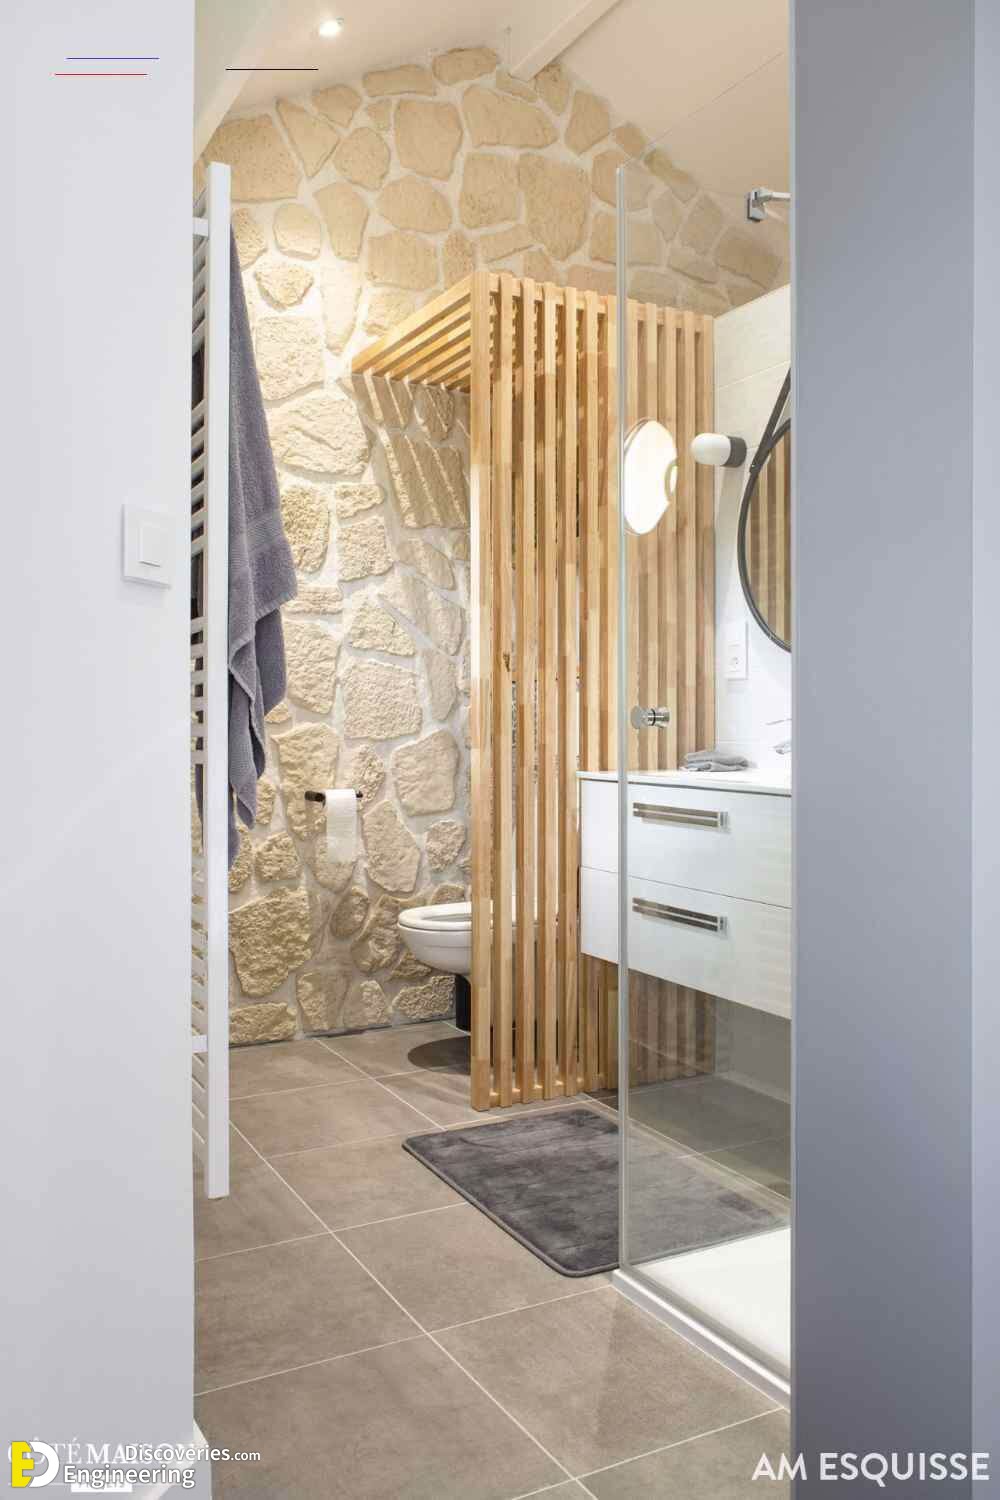 10 Amazing Bathroom Partition Options You Will Admire